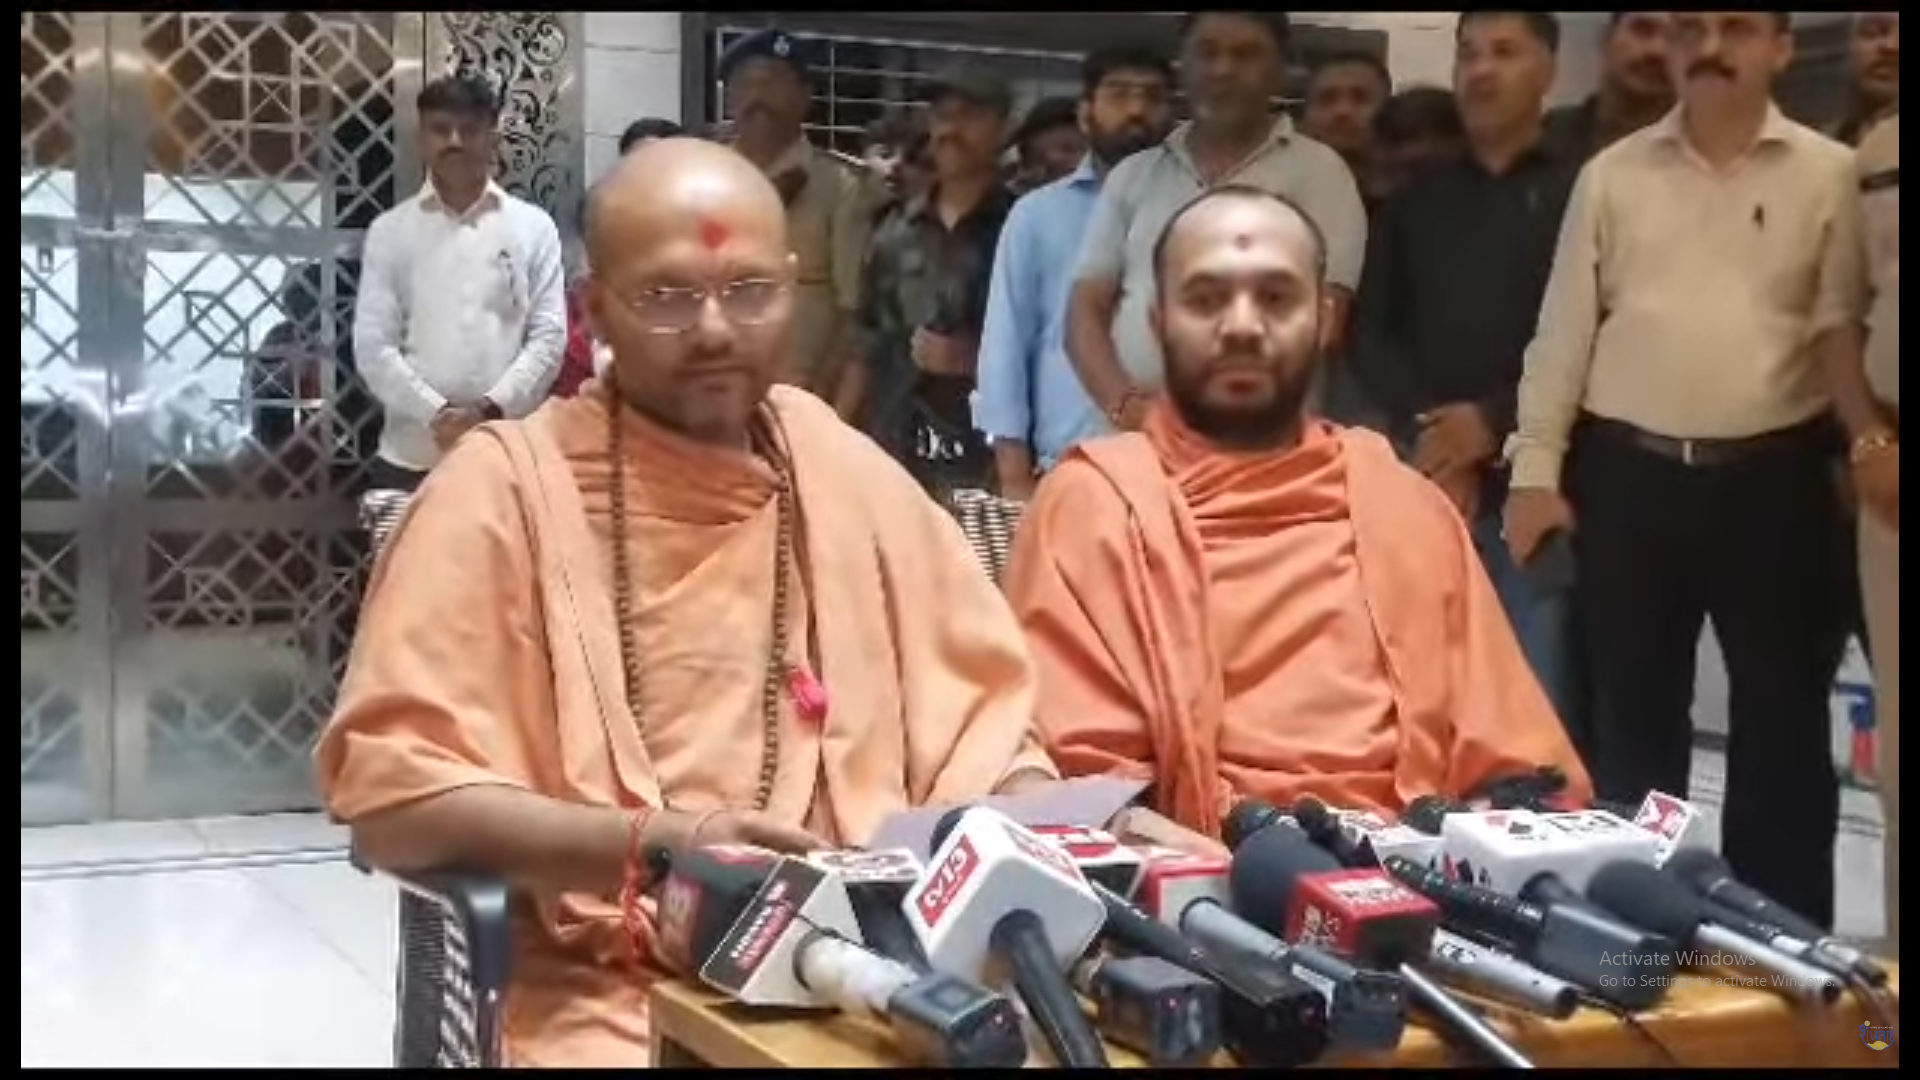 Finally, a press conference was held in the premises of Salangpur temple after giving brief information